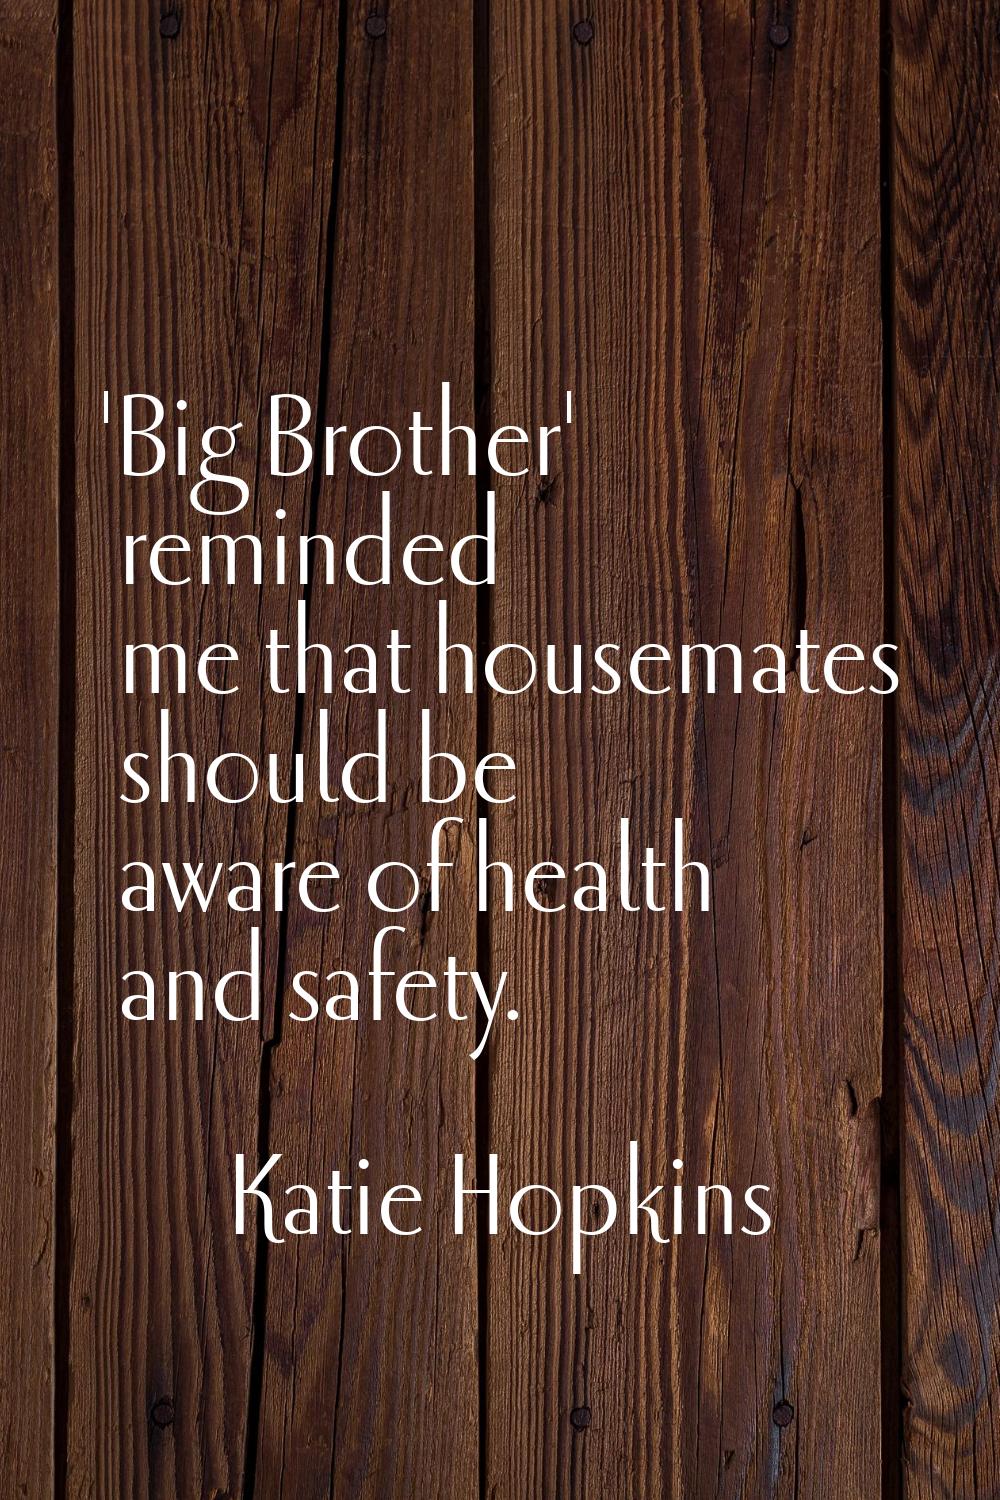 'Big Brother' reminded me that housemates should be aware of health and safety.